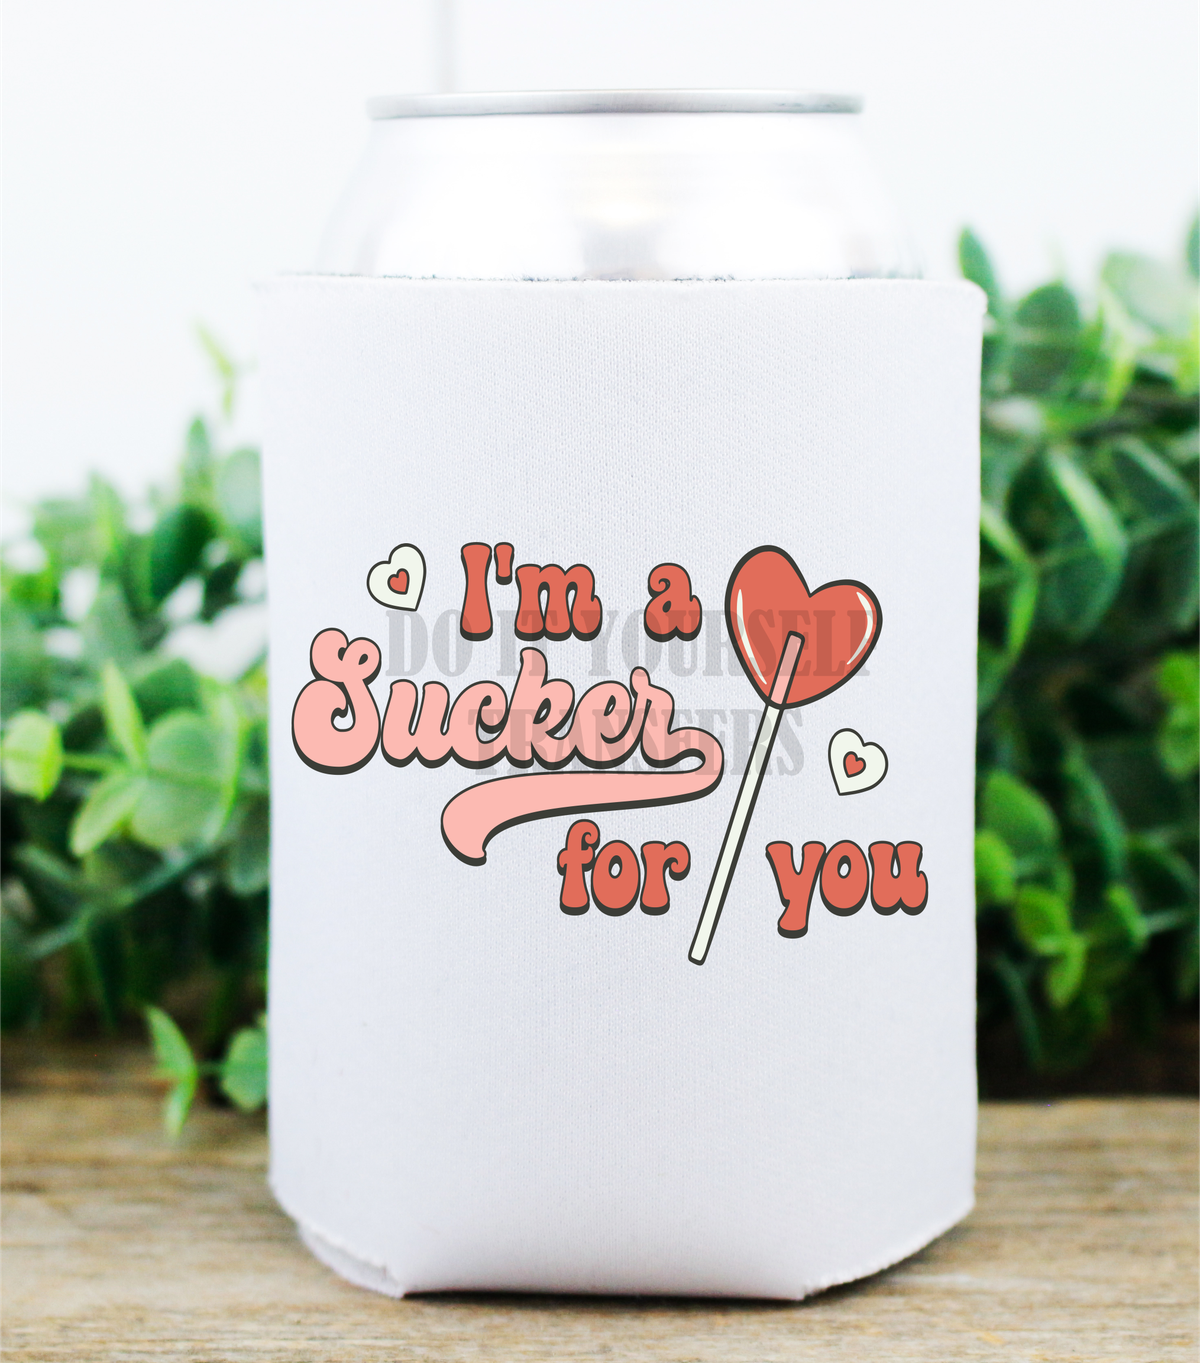 I'm a Sucker for LOVE Valentine's Day hearts  / size  DTF TRANSFERPRINT TO ORDER